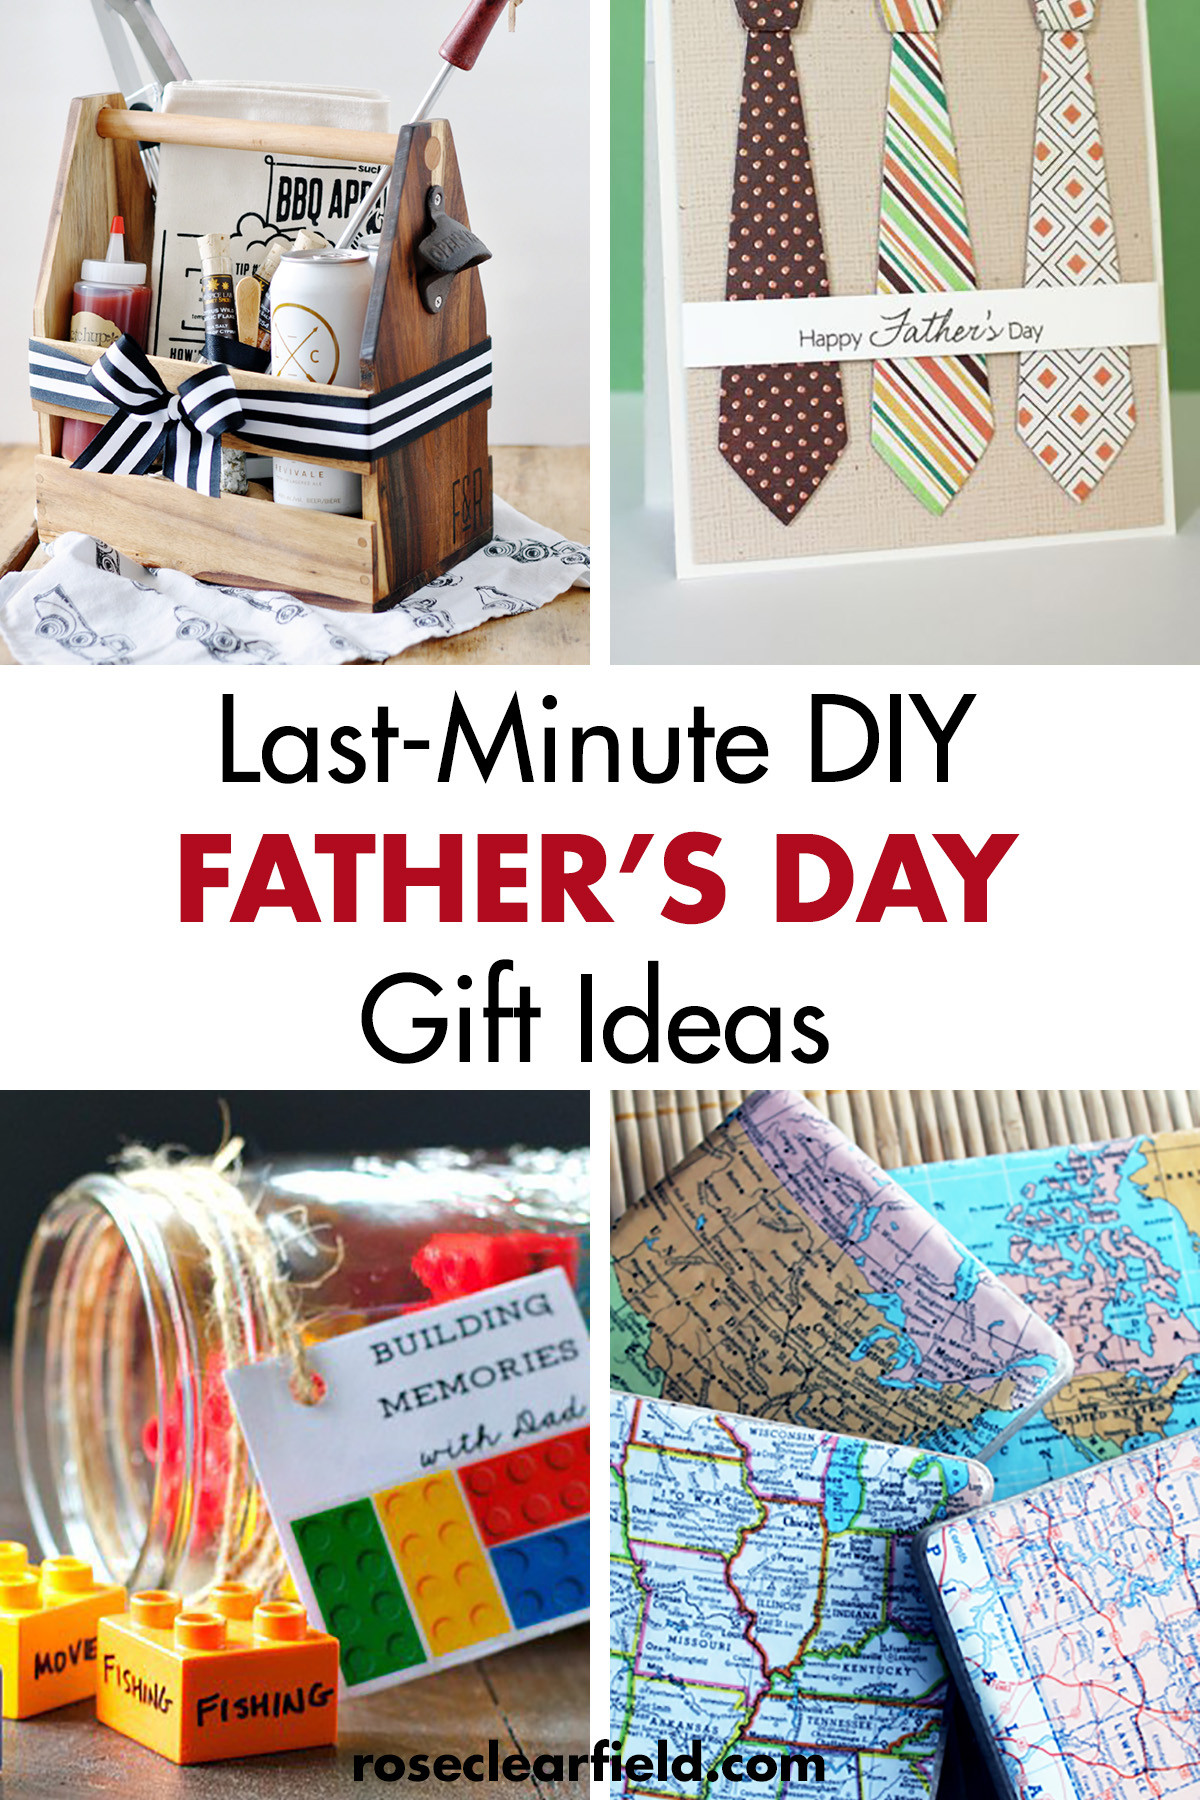 Father'S Day Gift Ideas DIY
 Last Minute DIY Father s Day Gift Ideas • Rose Clearfield